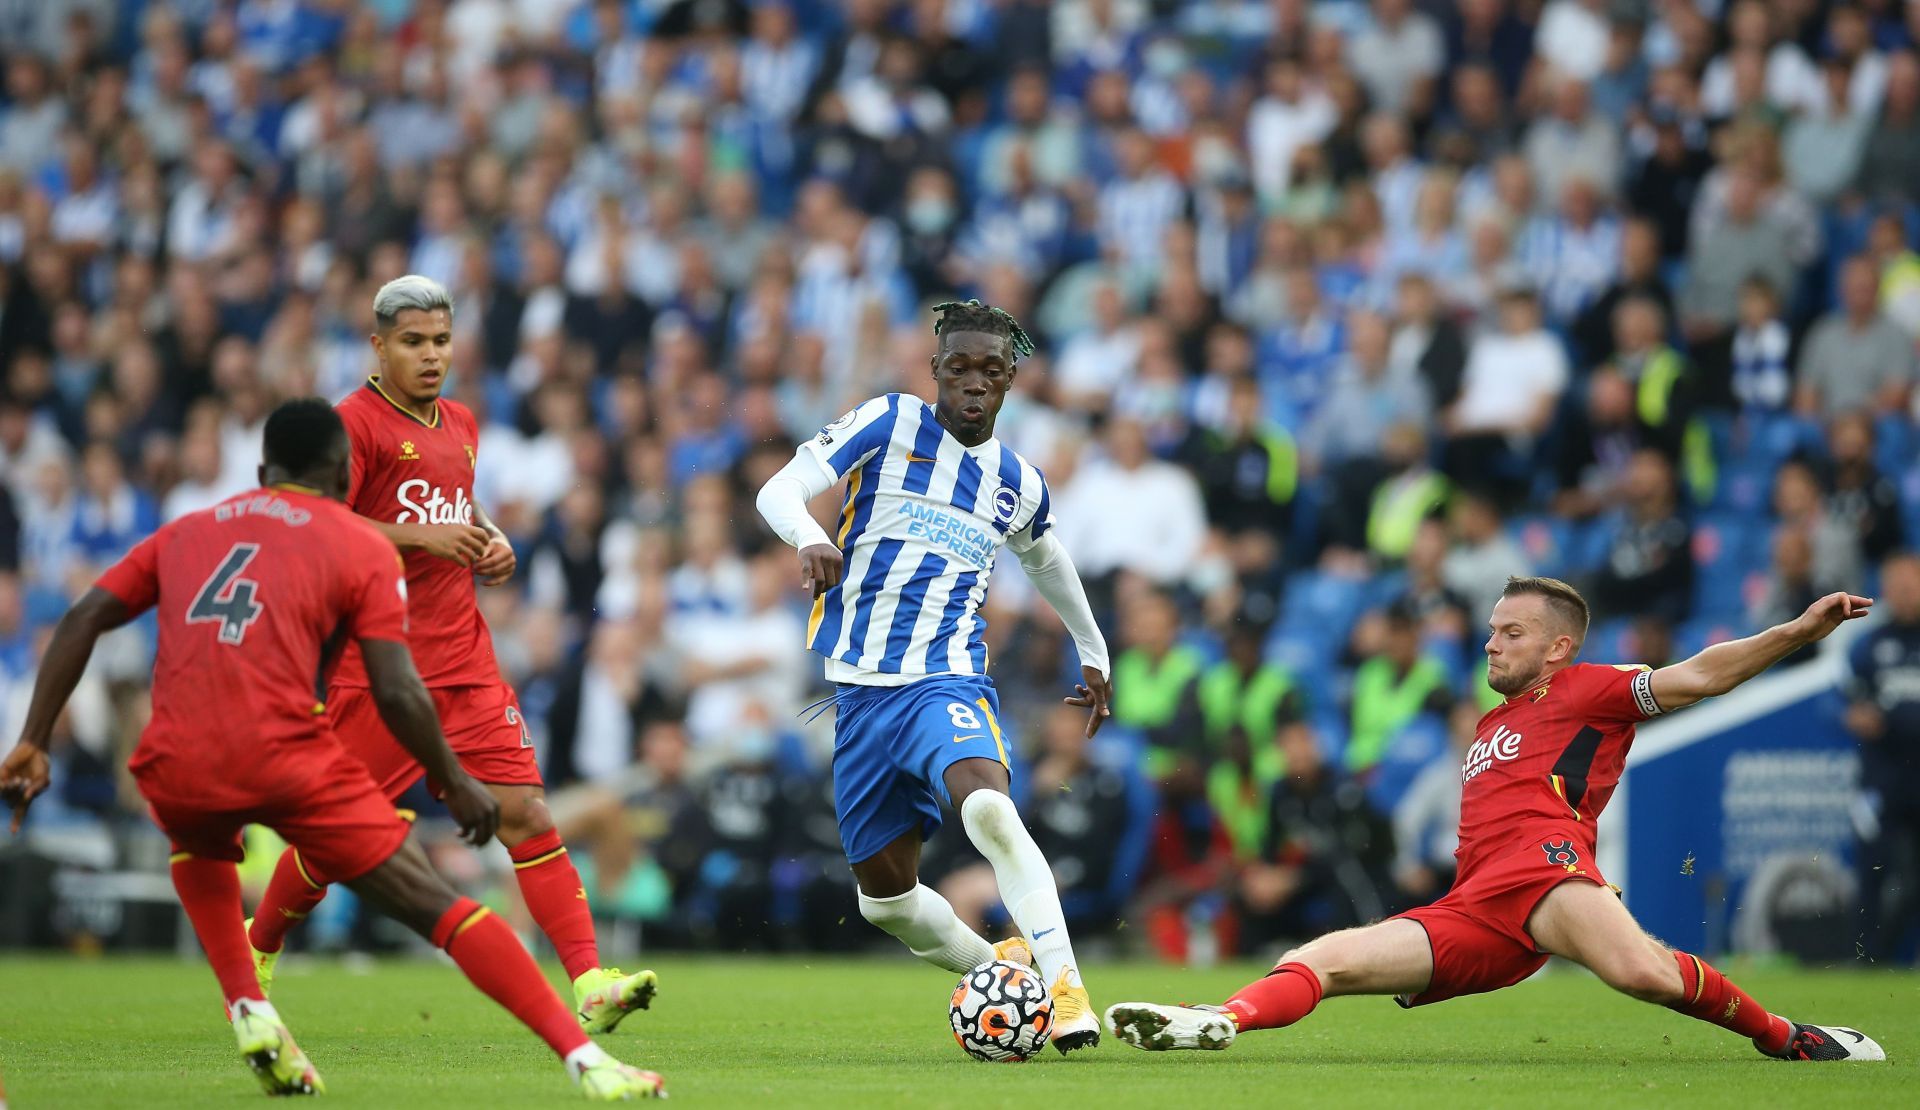 Watford play host to Brighton and Hove Albion on Saturday